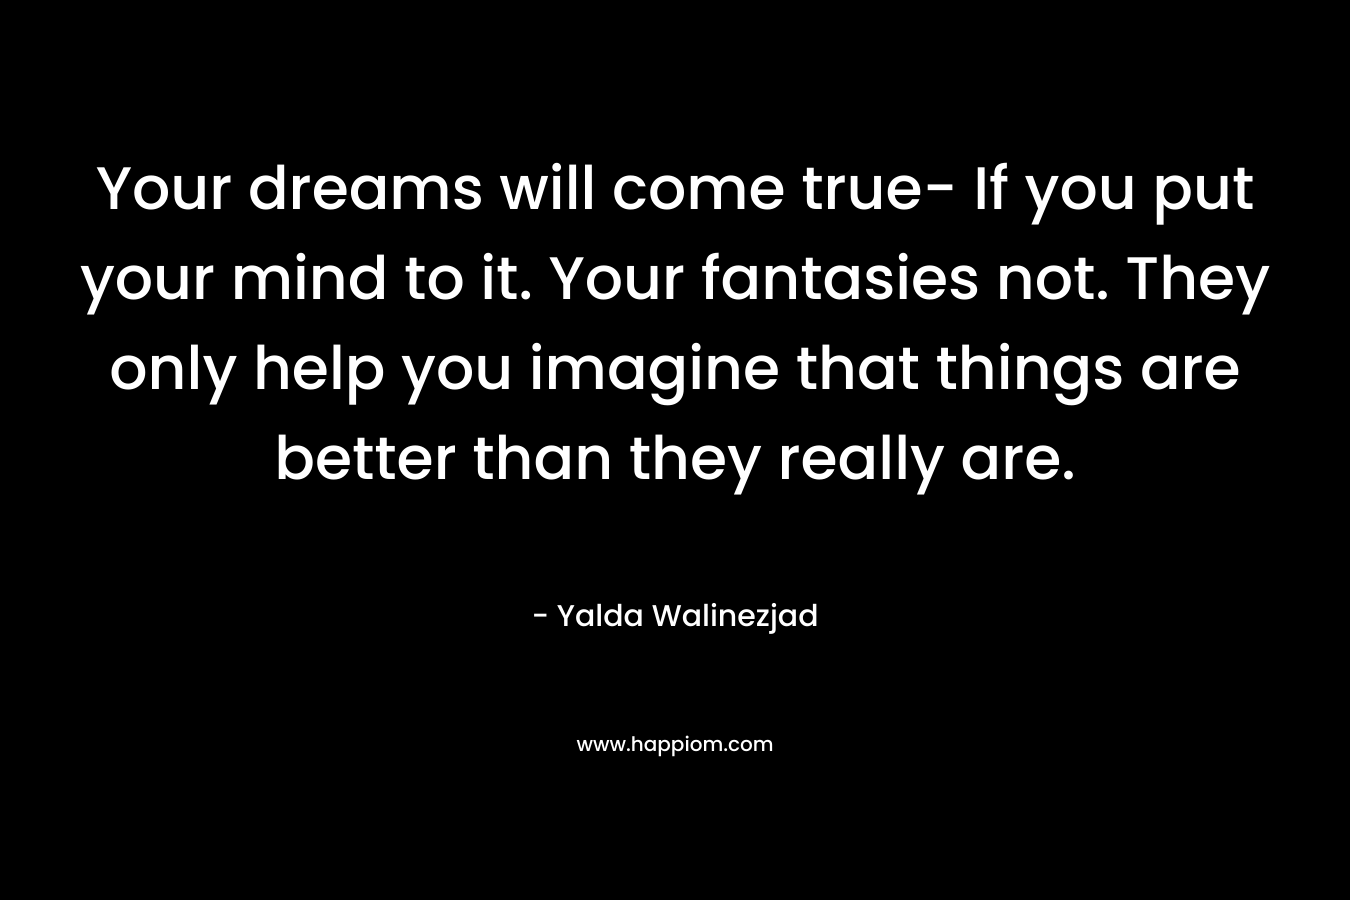 Your dreams will come true- If you put your mind to it. Your fantasies not. They only help you imagine that things are better than they really are. – Yalda Walinezjad